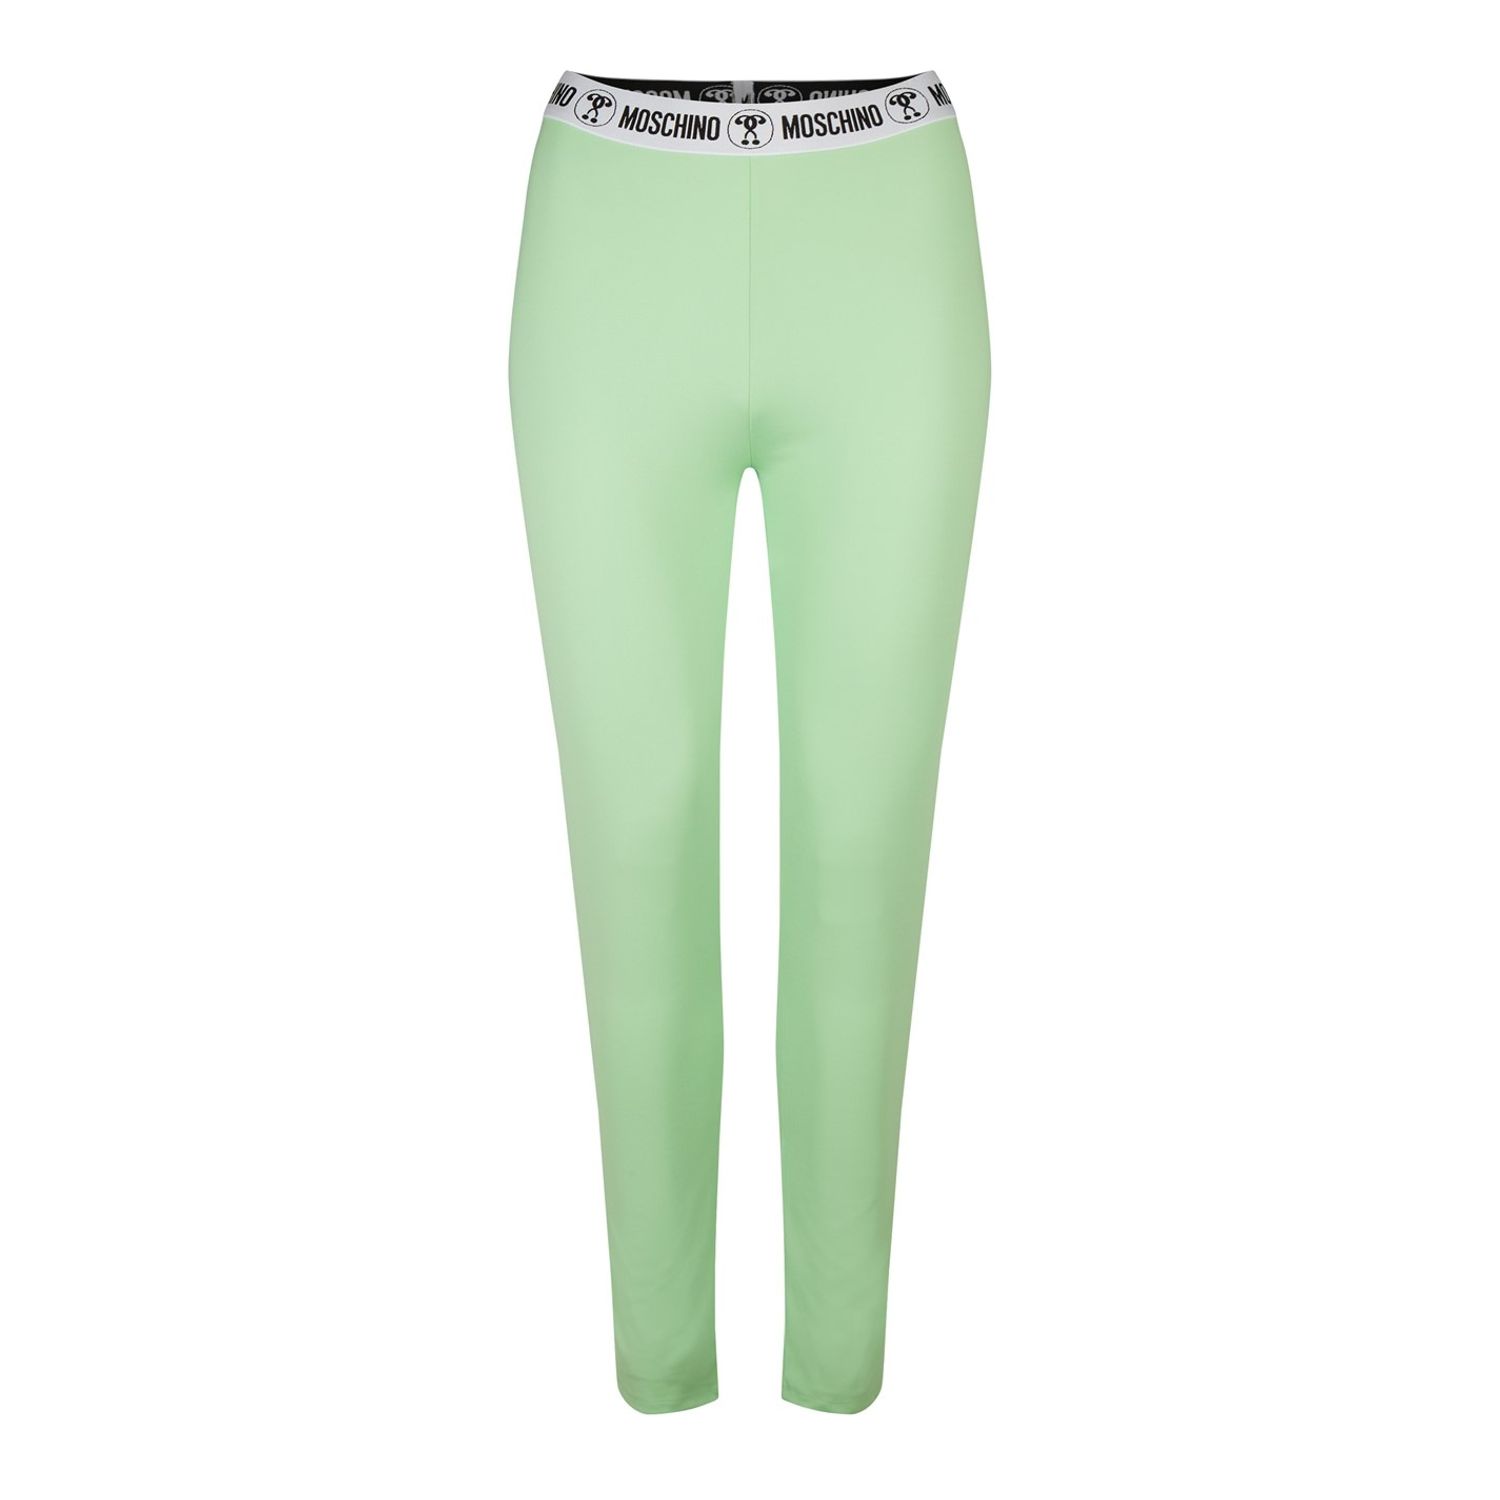 Green Moschino Question Mark Leggings - Get The Label